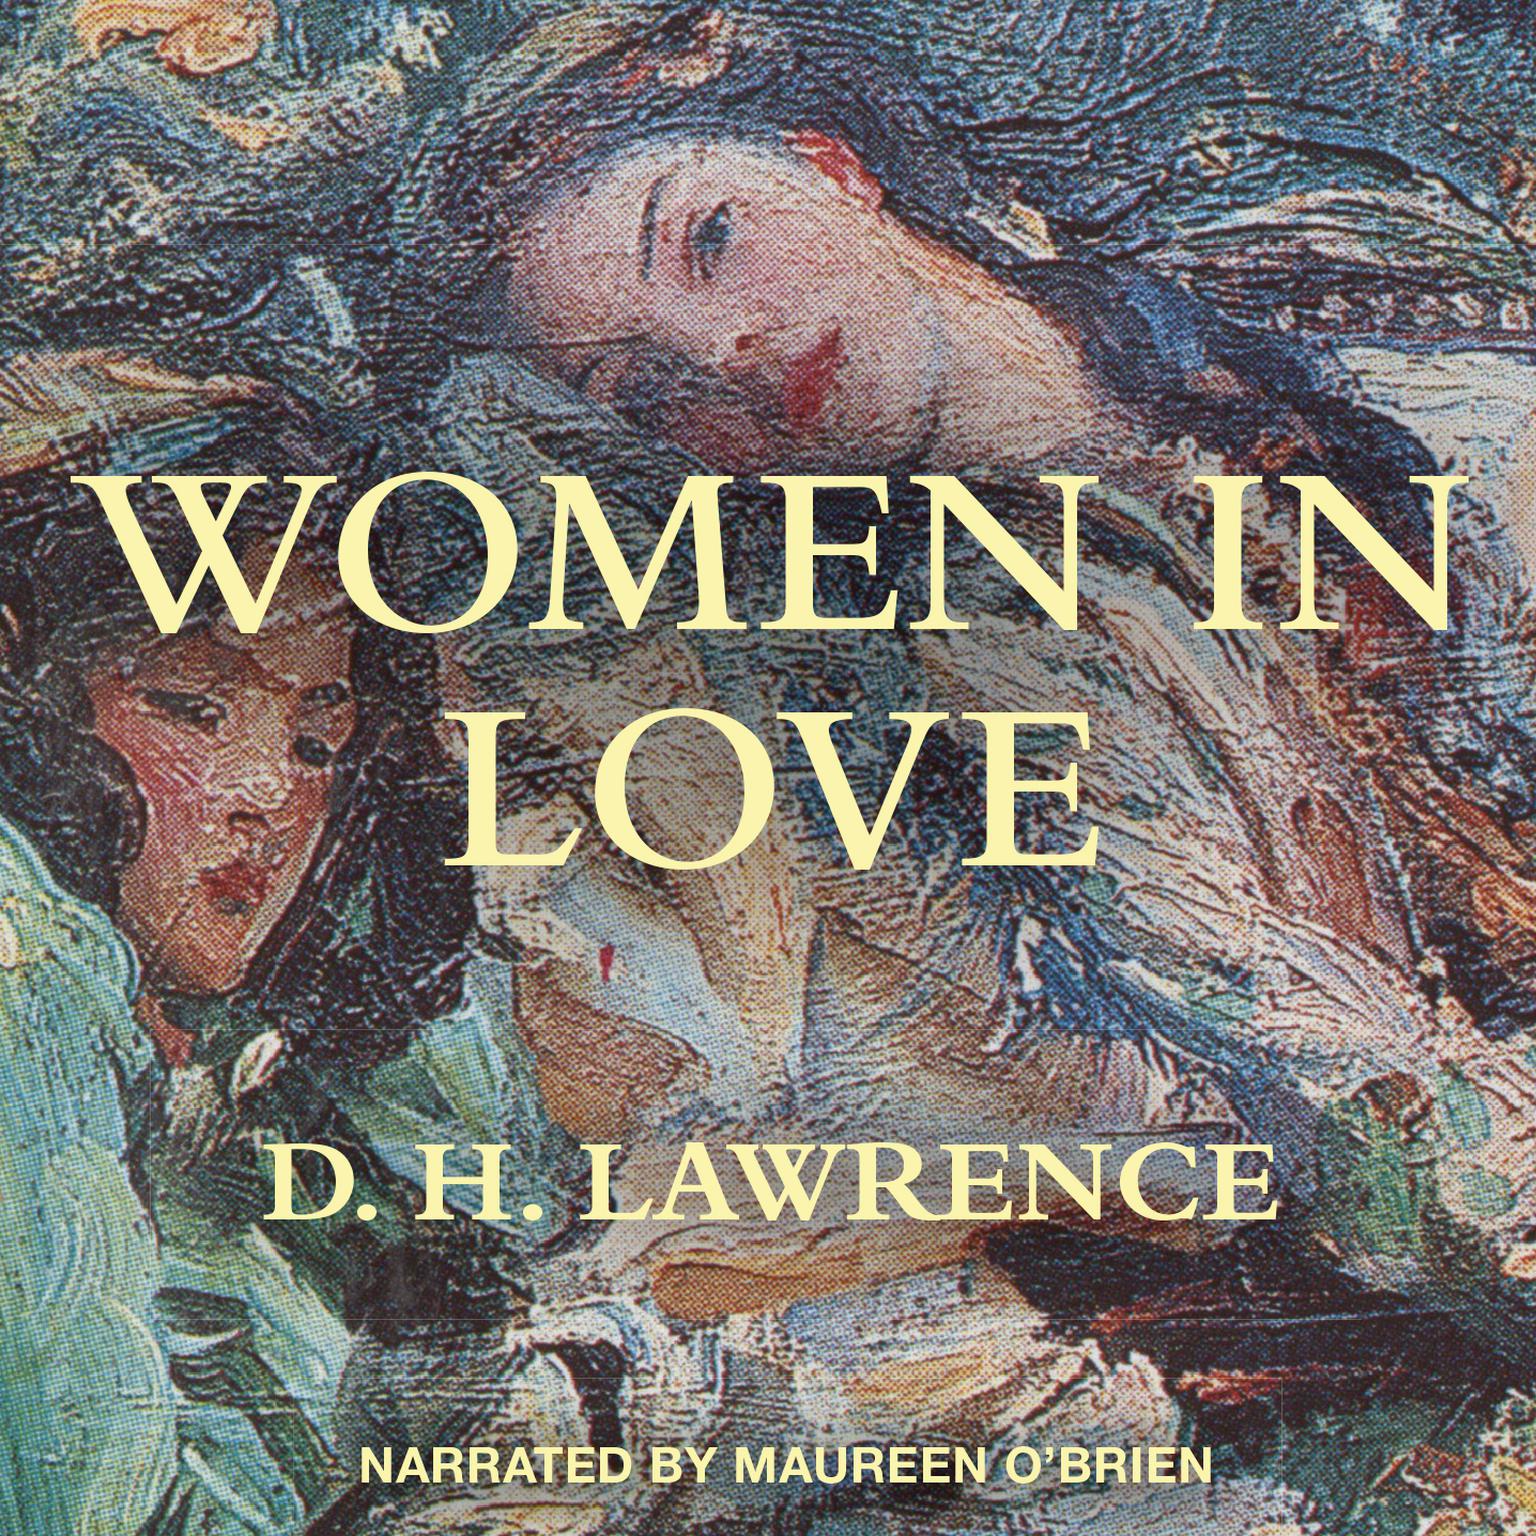 Women in Love Audiobook, by D. H. Lawrence